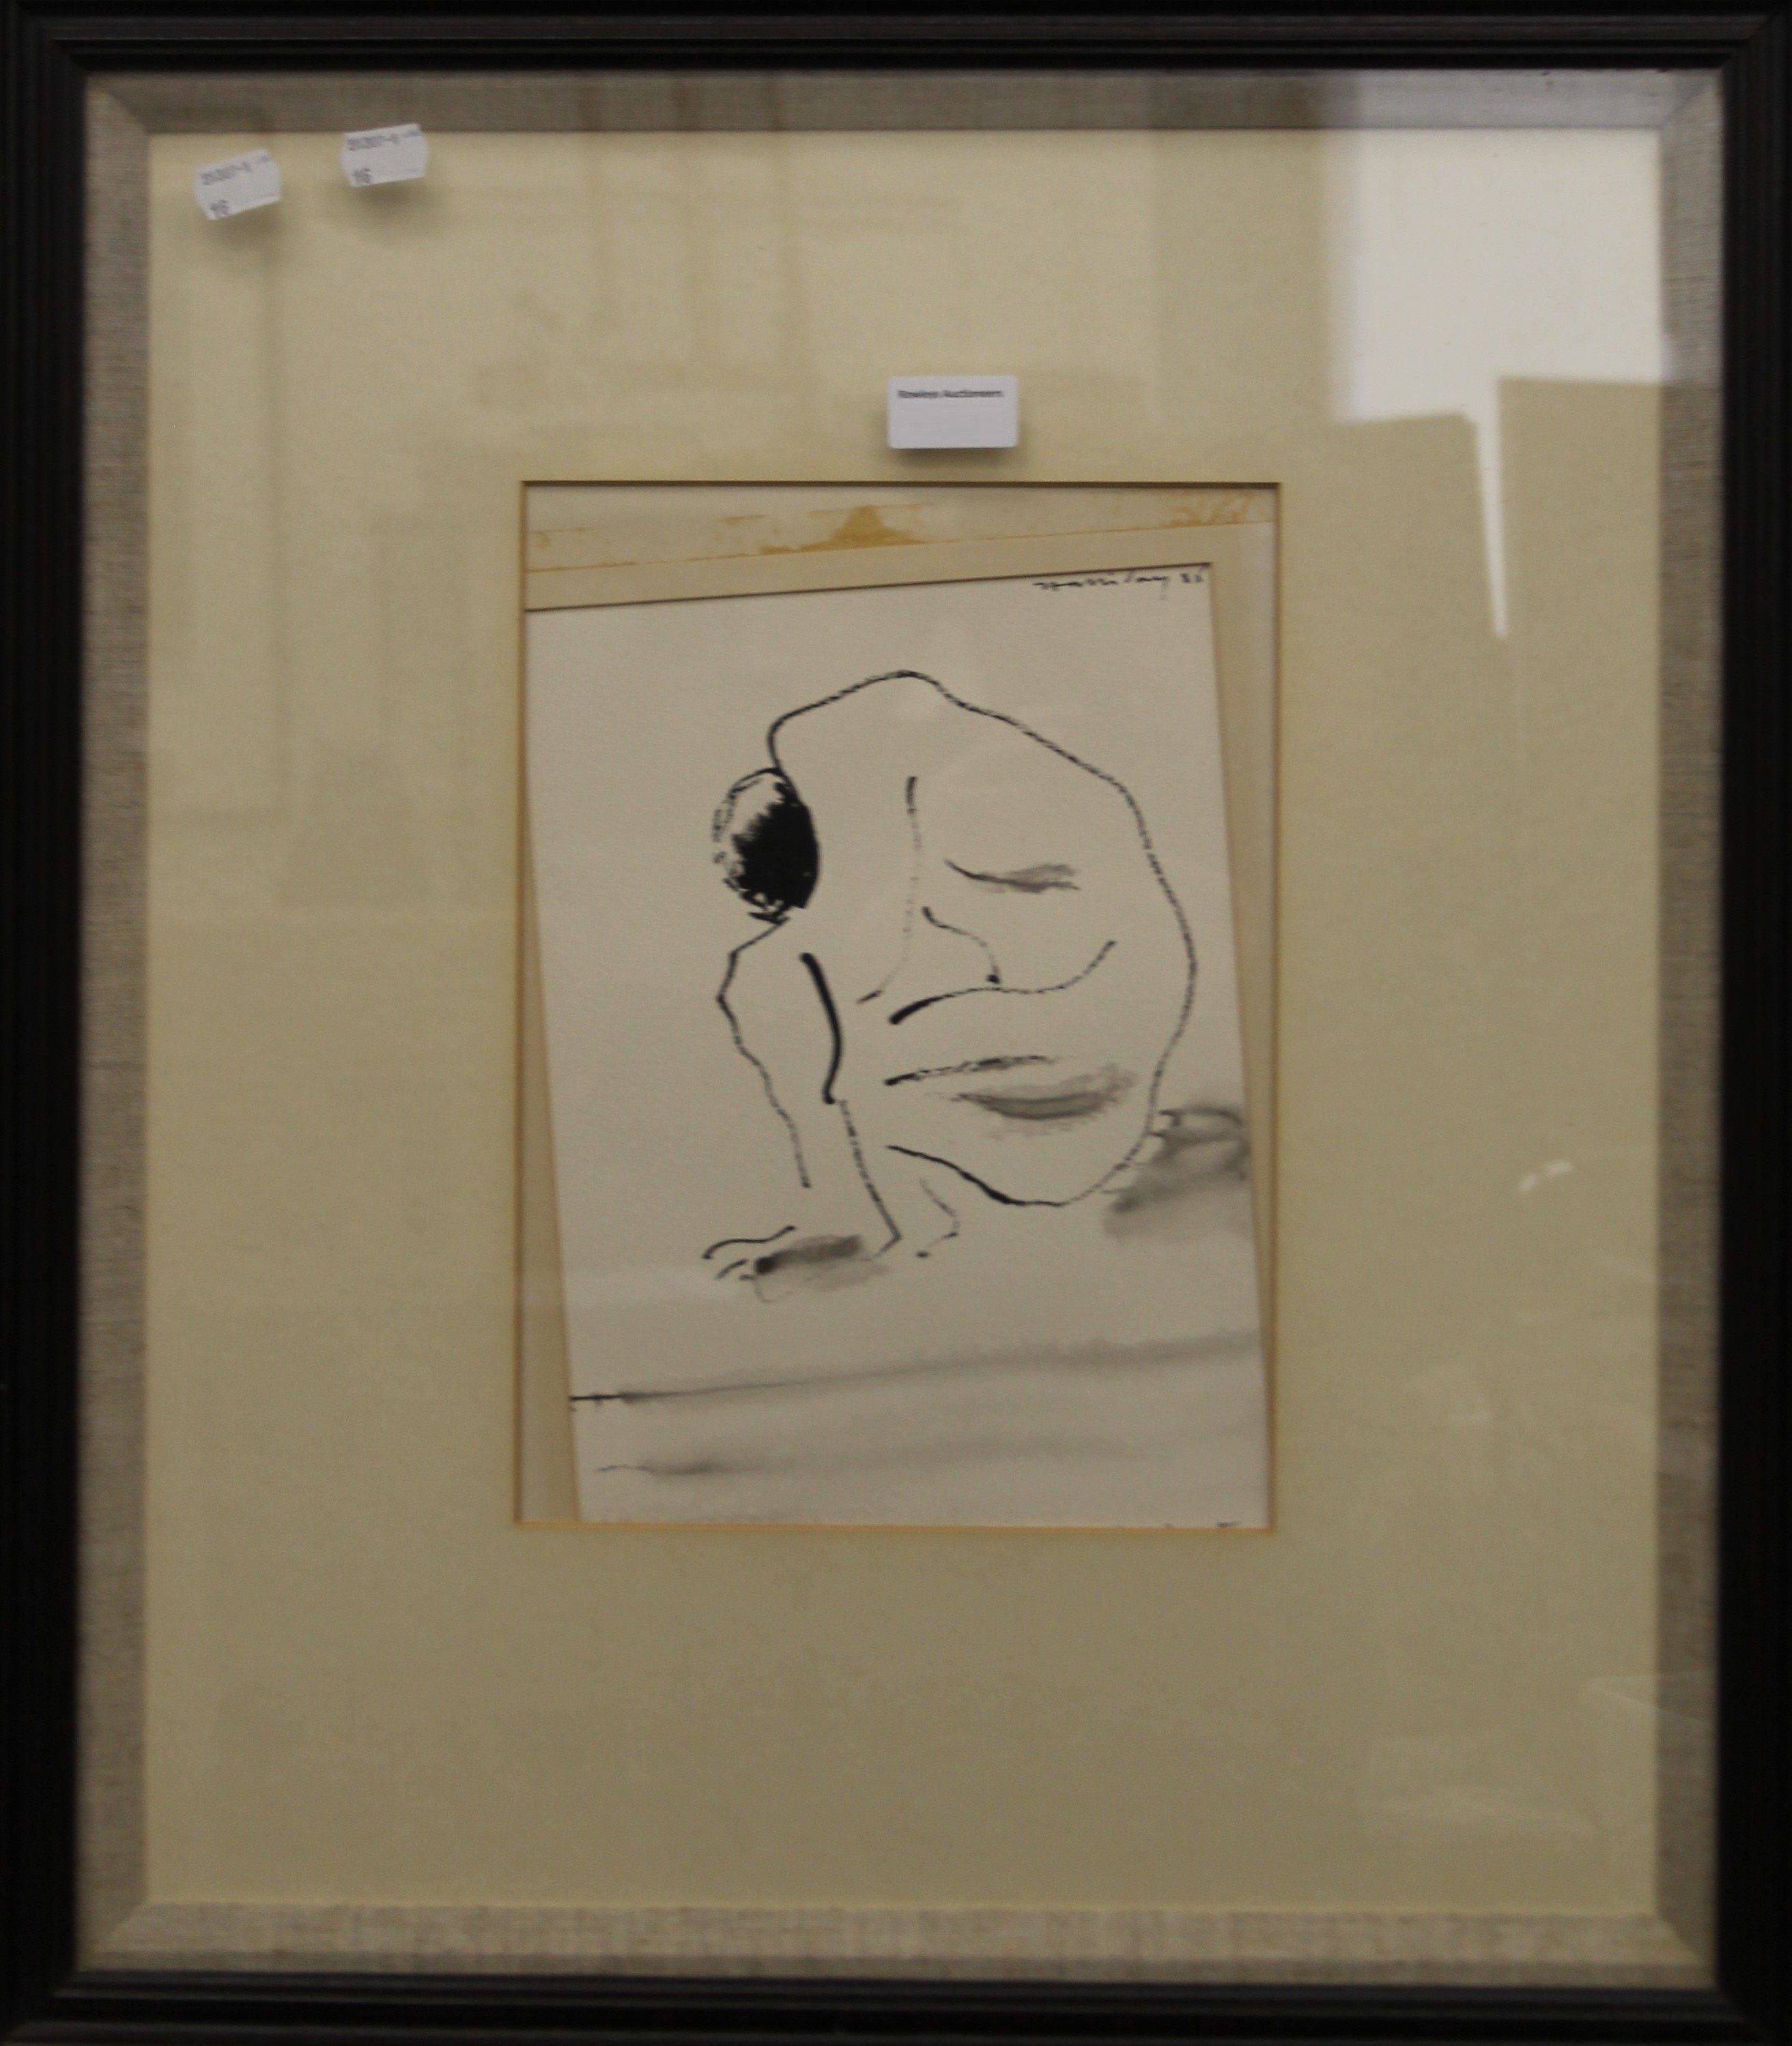 ALAN HALLIDAY (born 1952), Poor Tom's a-cold, pen and wash, dated 1985, framed and glazed. 20. - Image 2 of 2